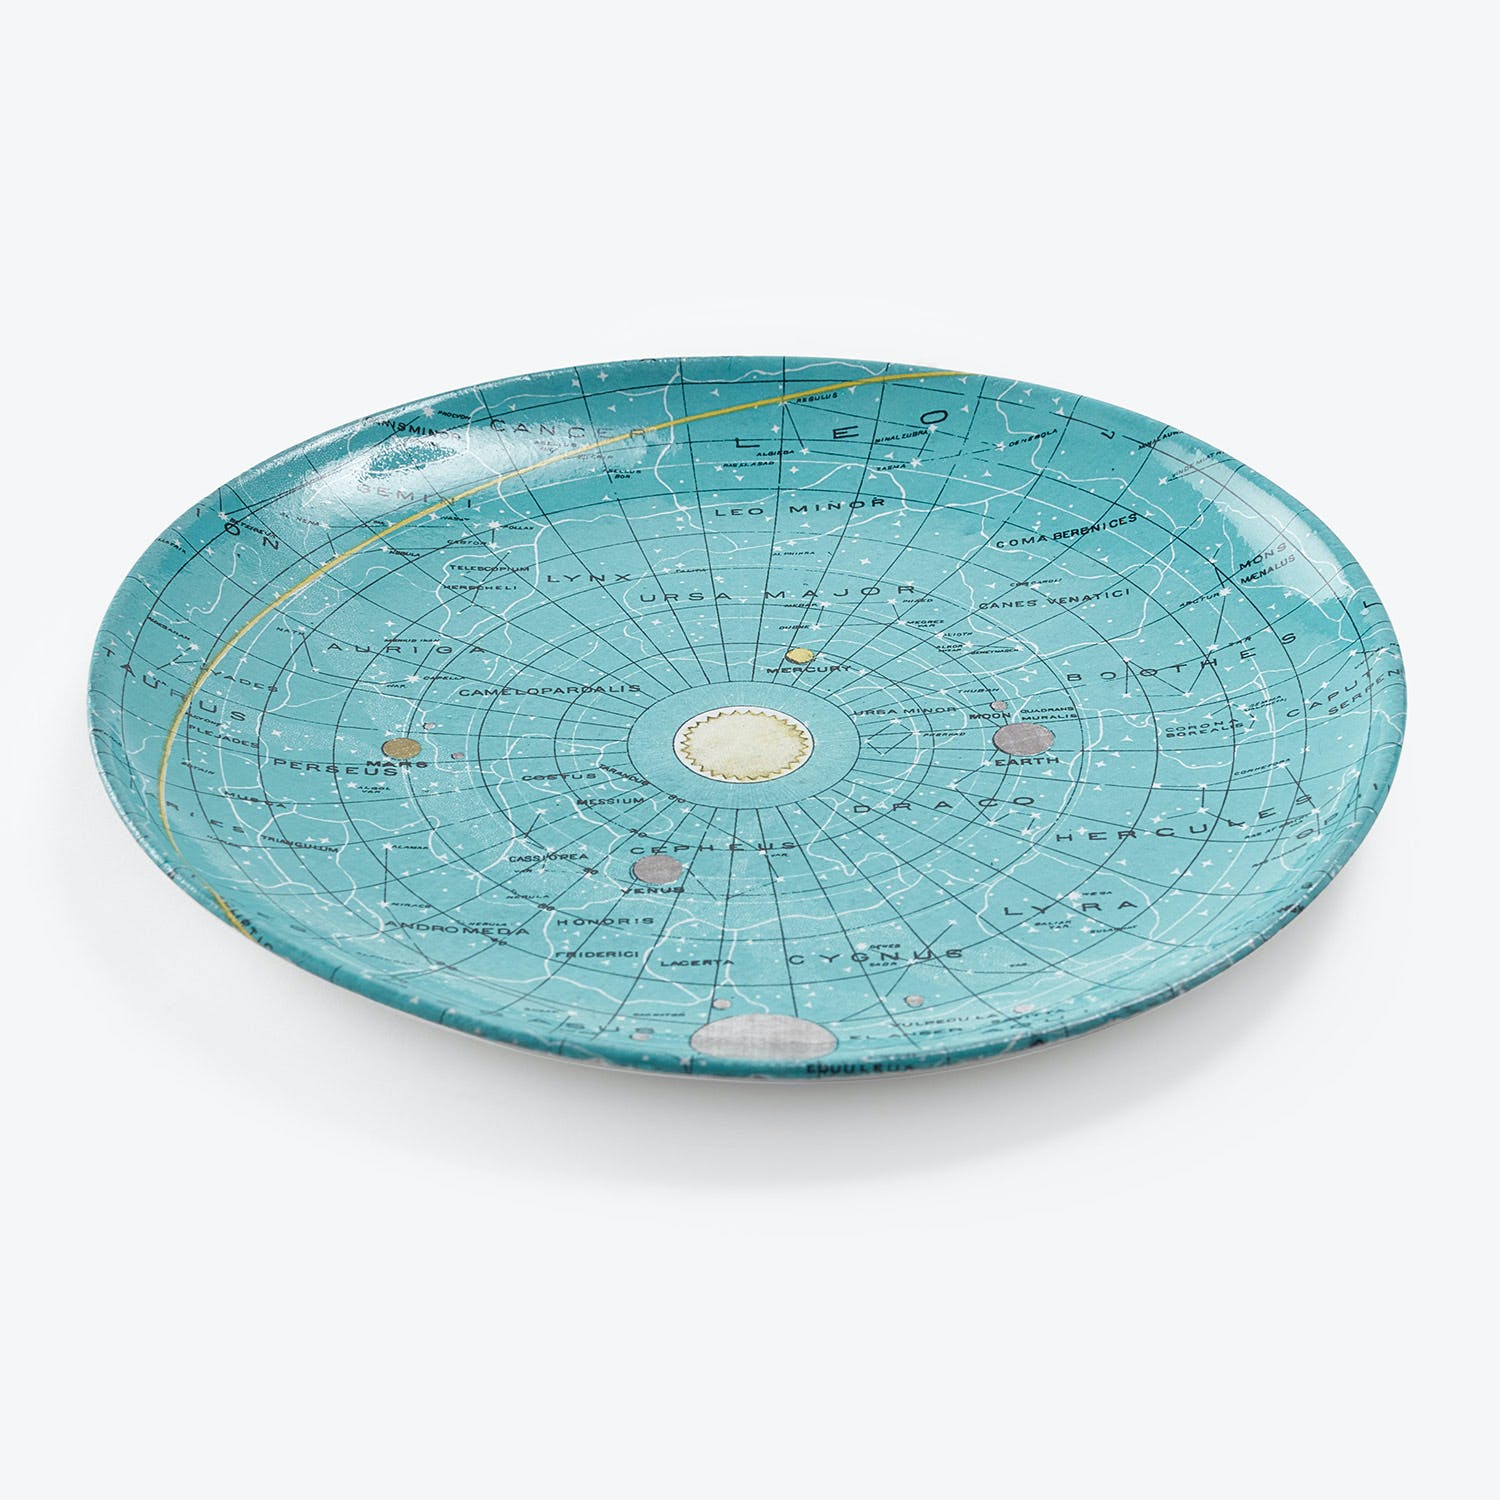 Decorative plate with vintage celestial map design showcasing constellations.